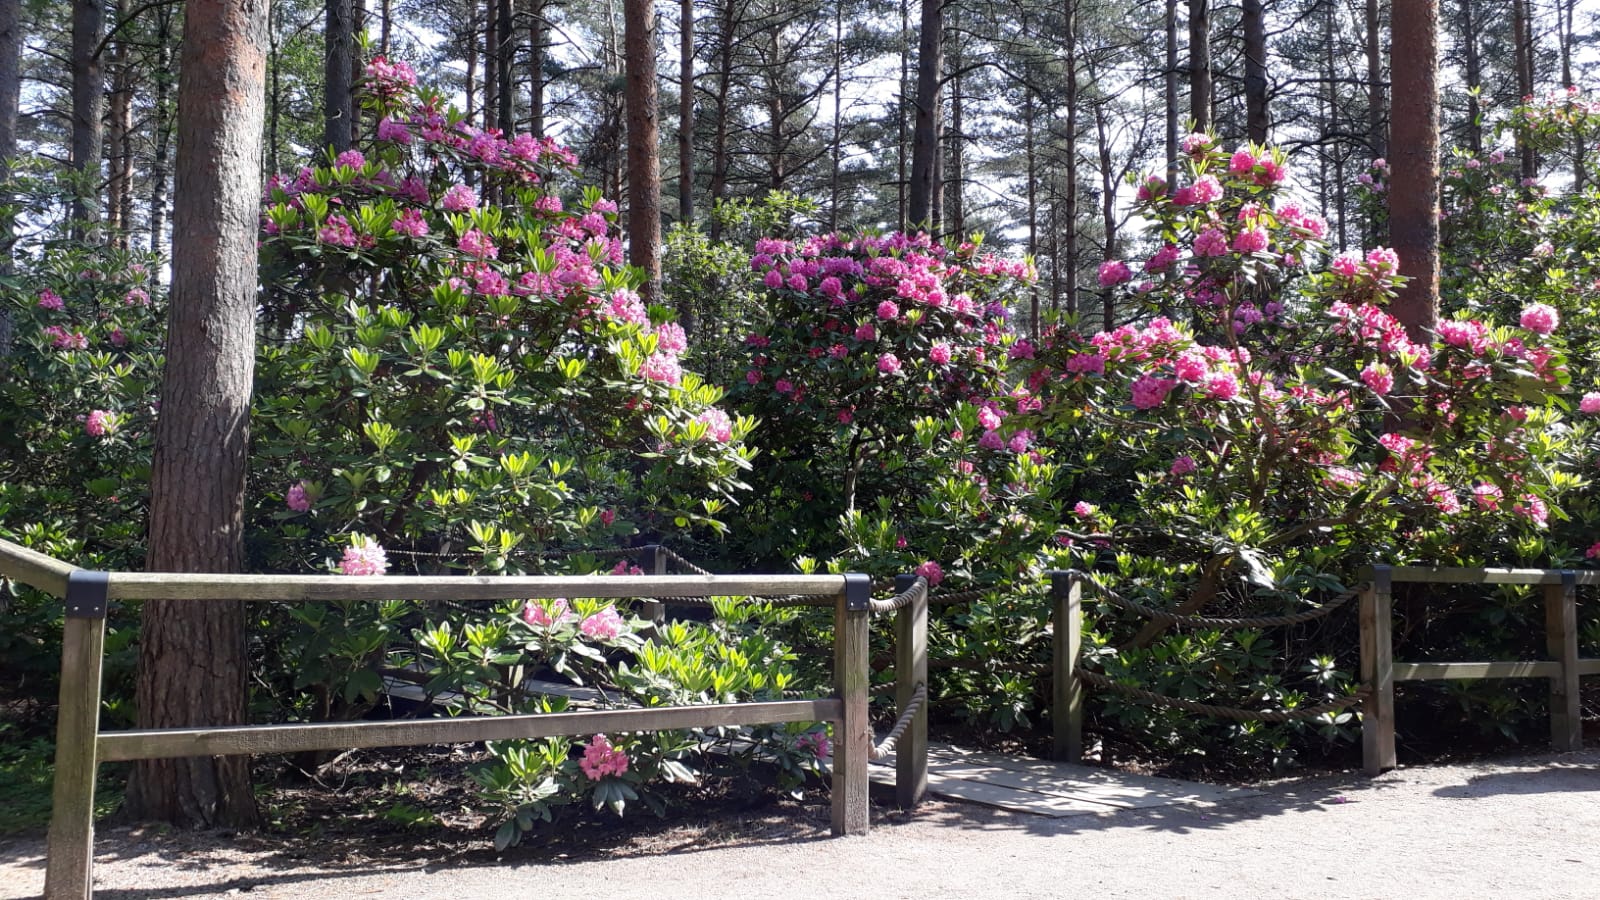 Rhododendron flowers at Haaga park in Helsinki